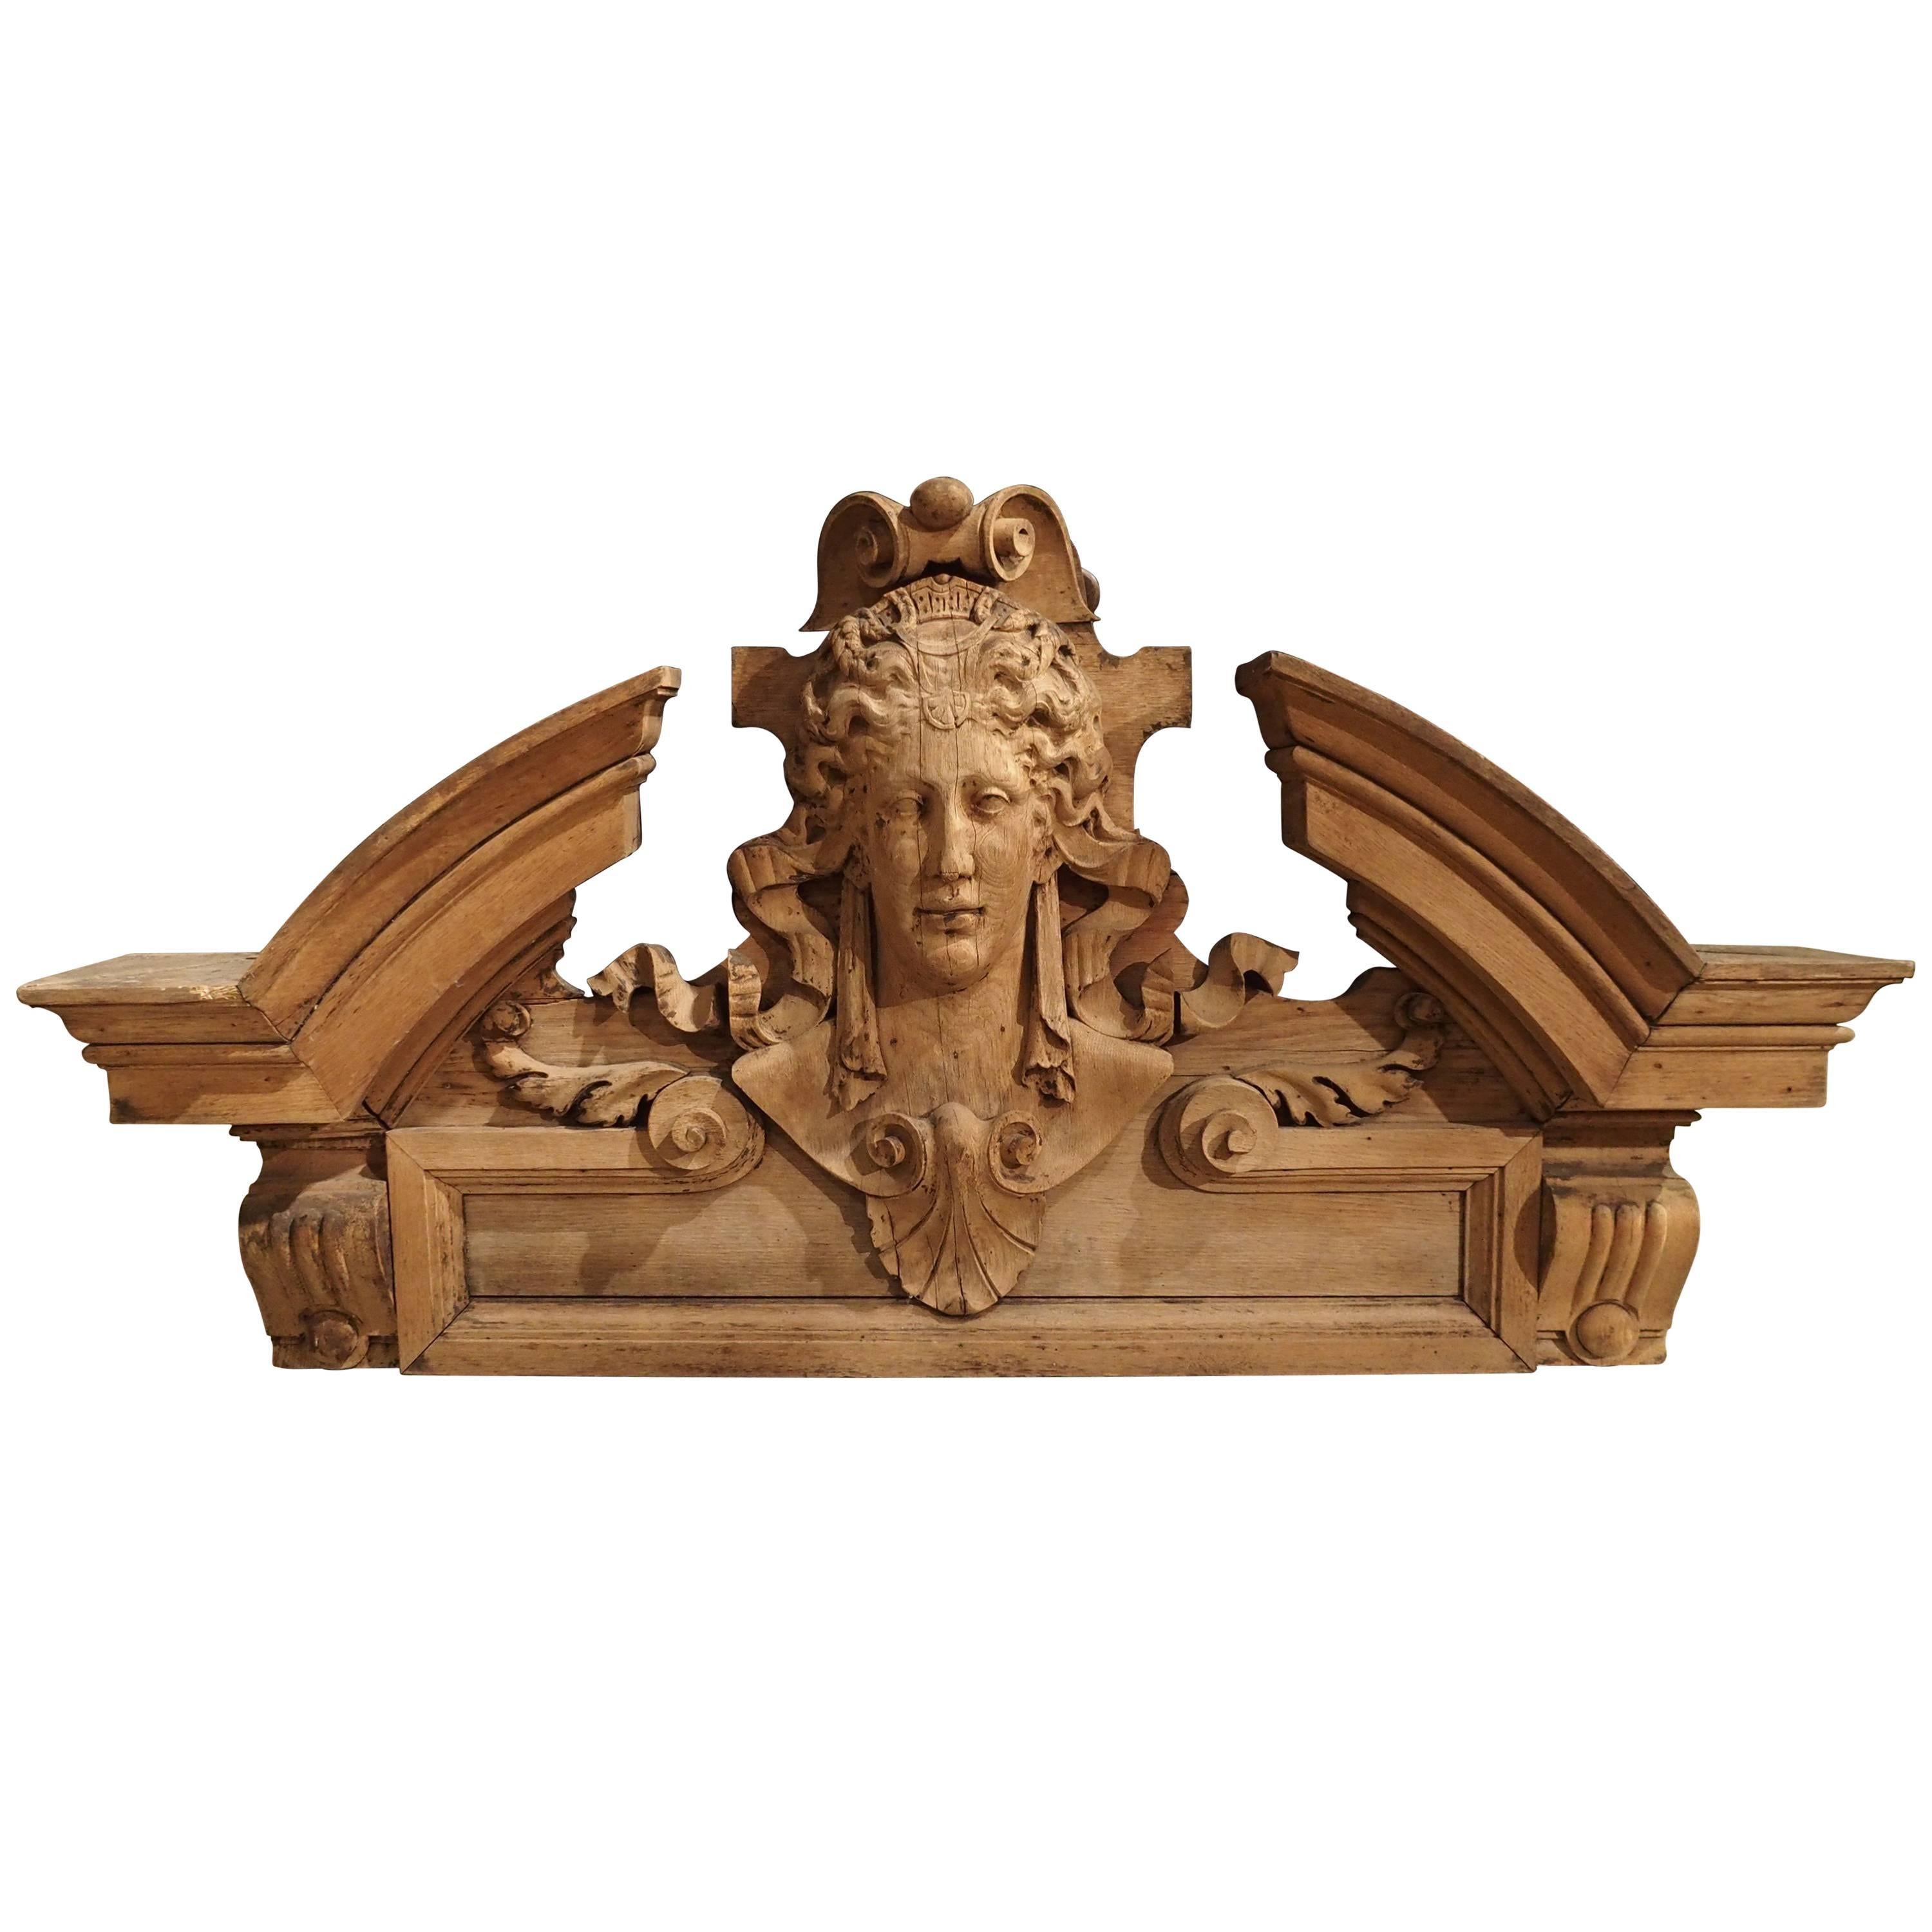 Carved Wooden Overdoor from France, circa 1850